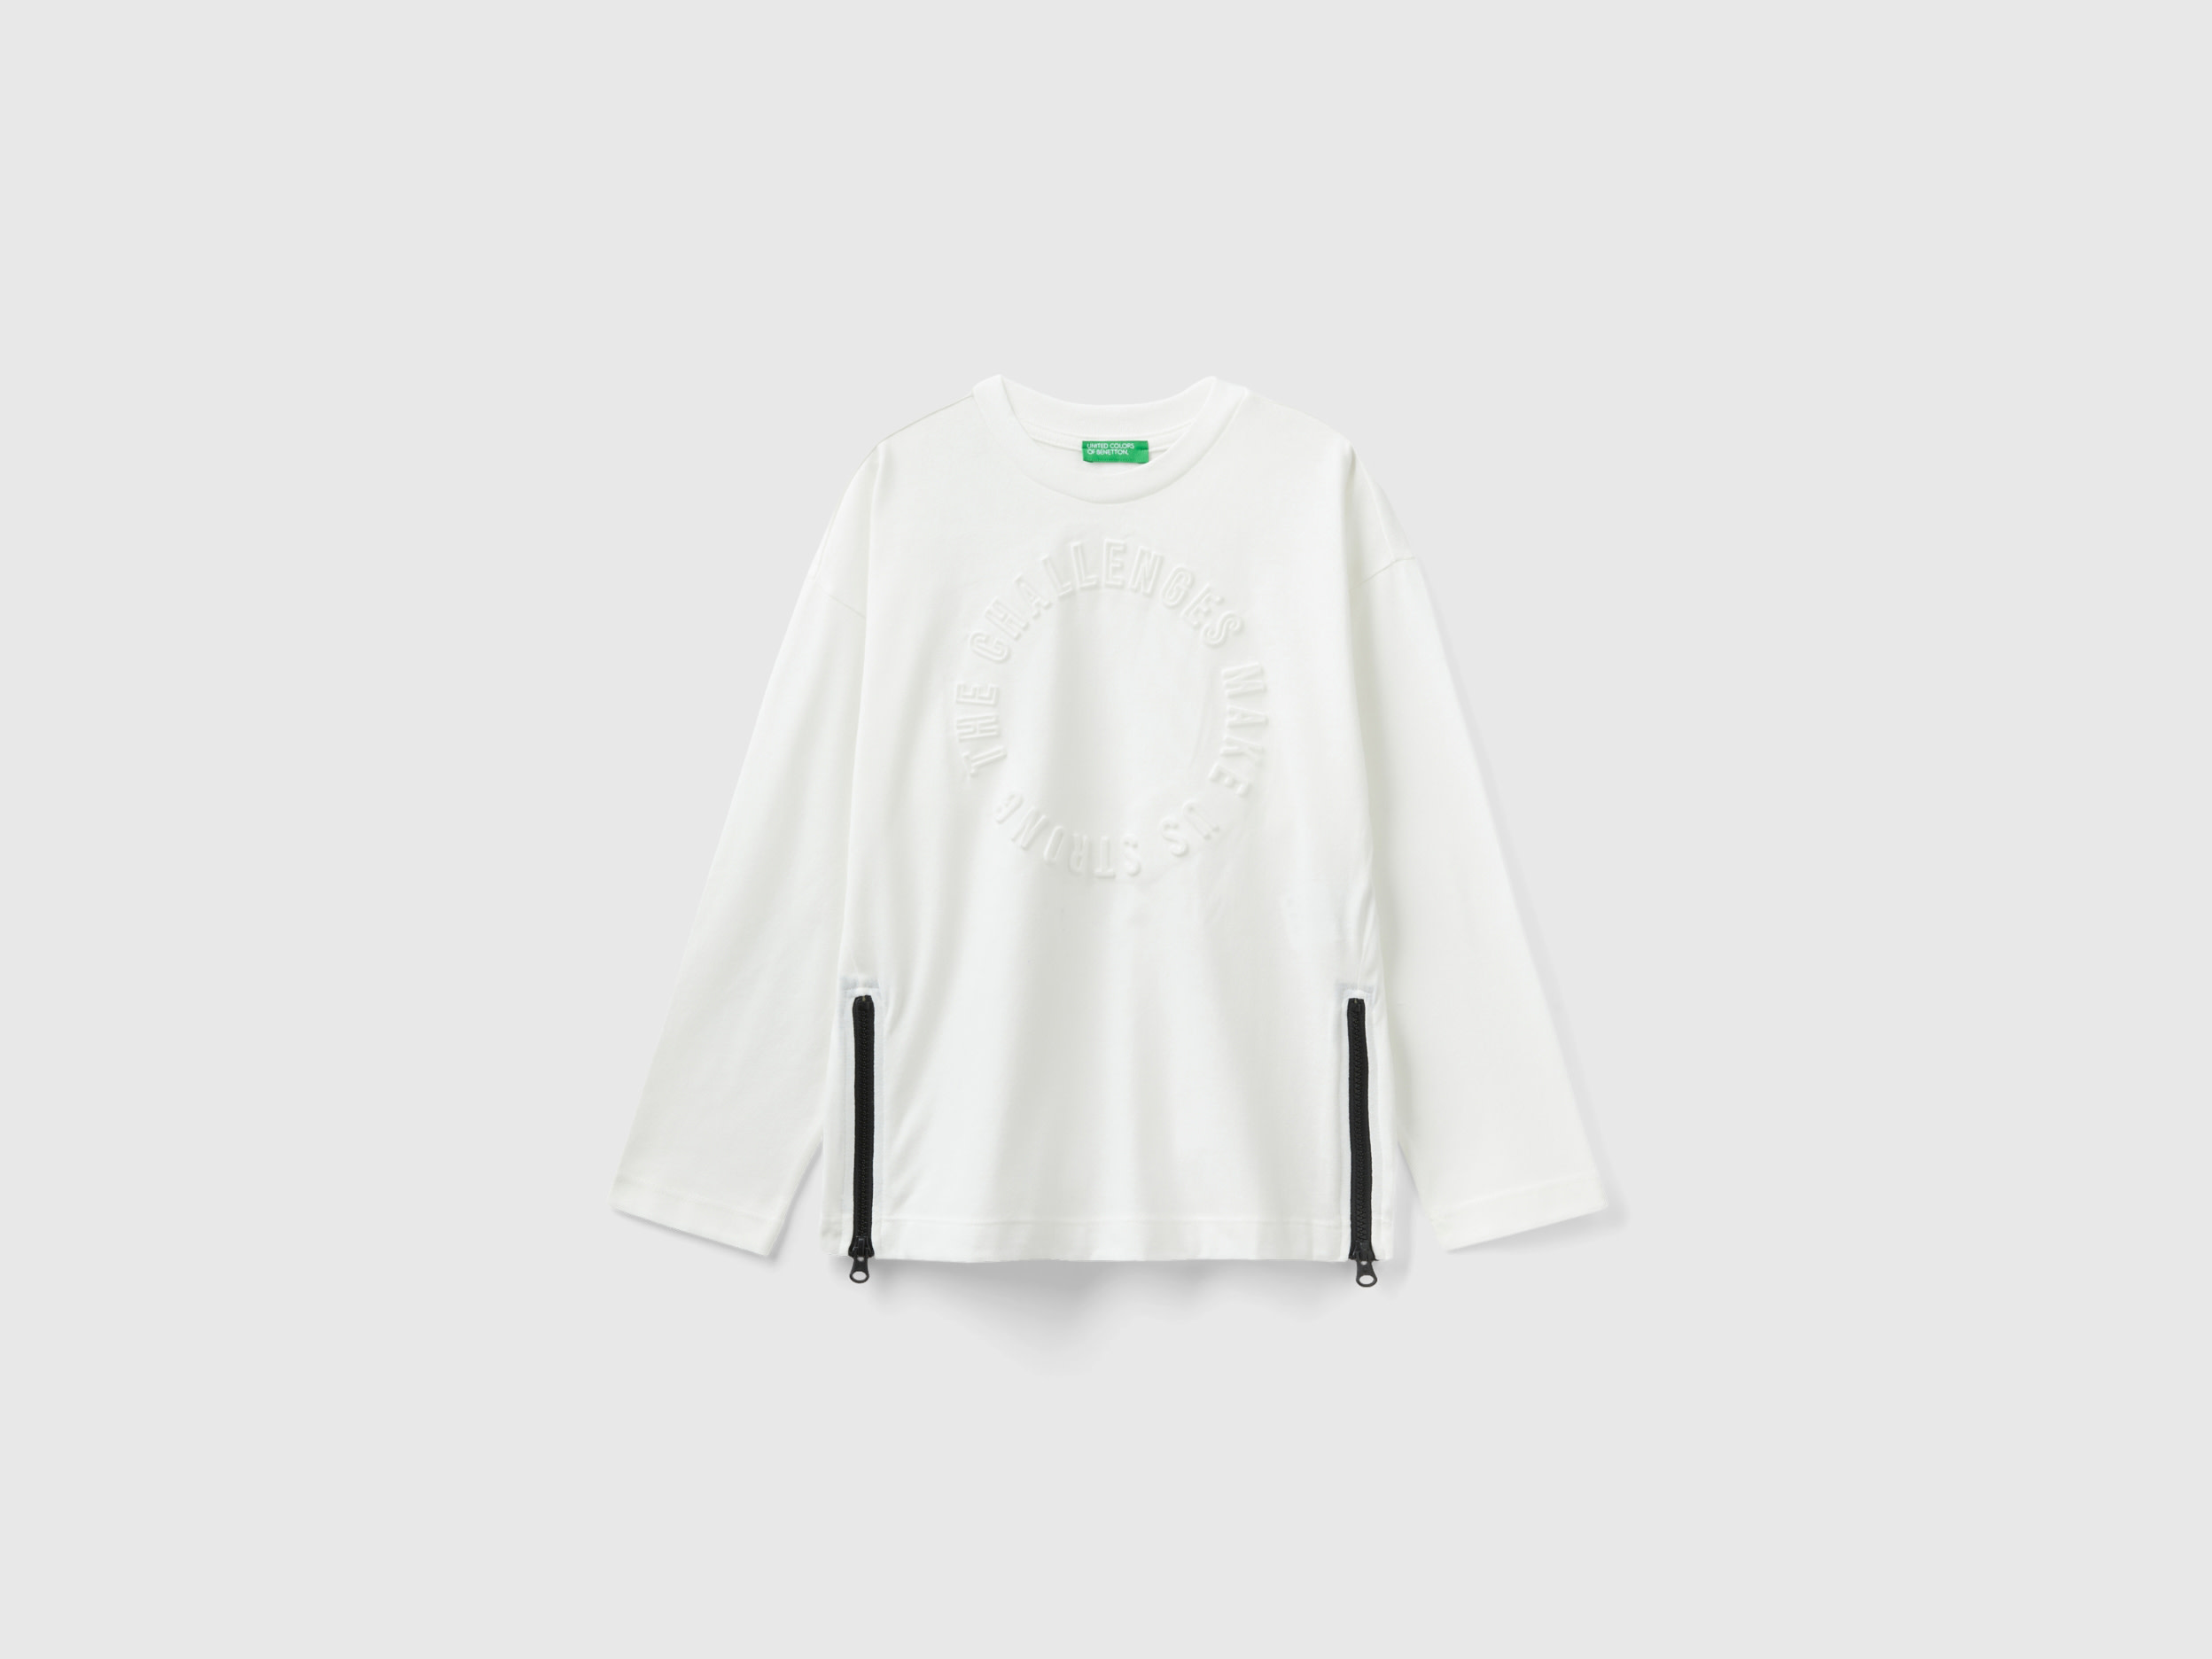 Benetton, Oversized Fit Sweatshirt With Embossed Print, size 3XL, White, Kids